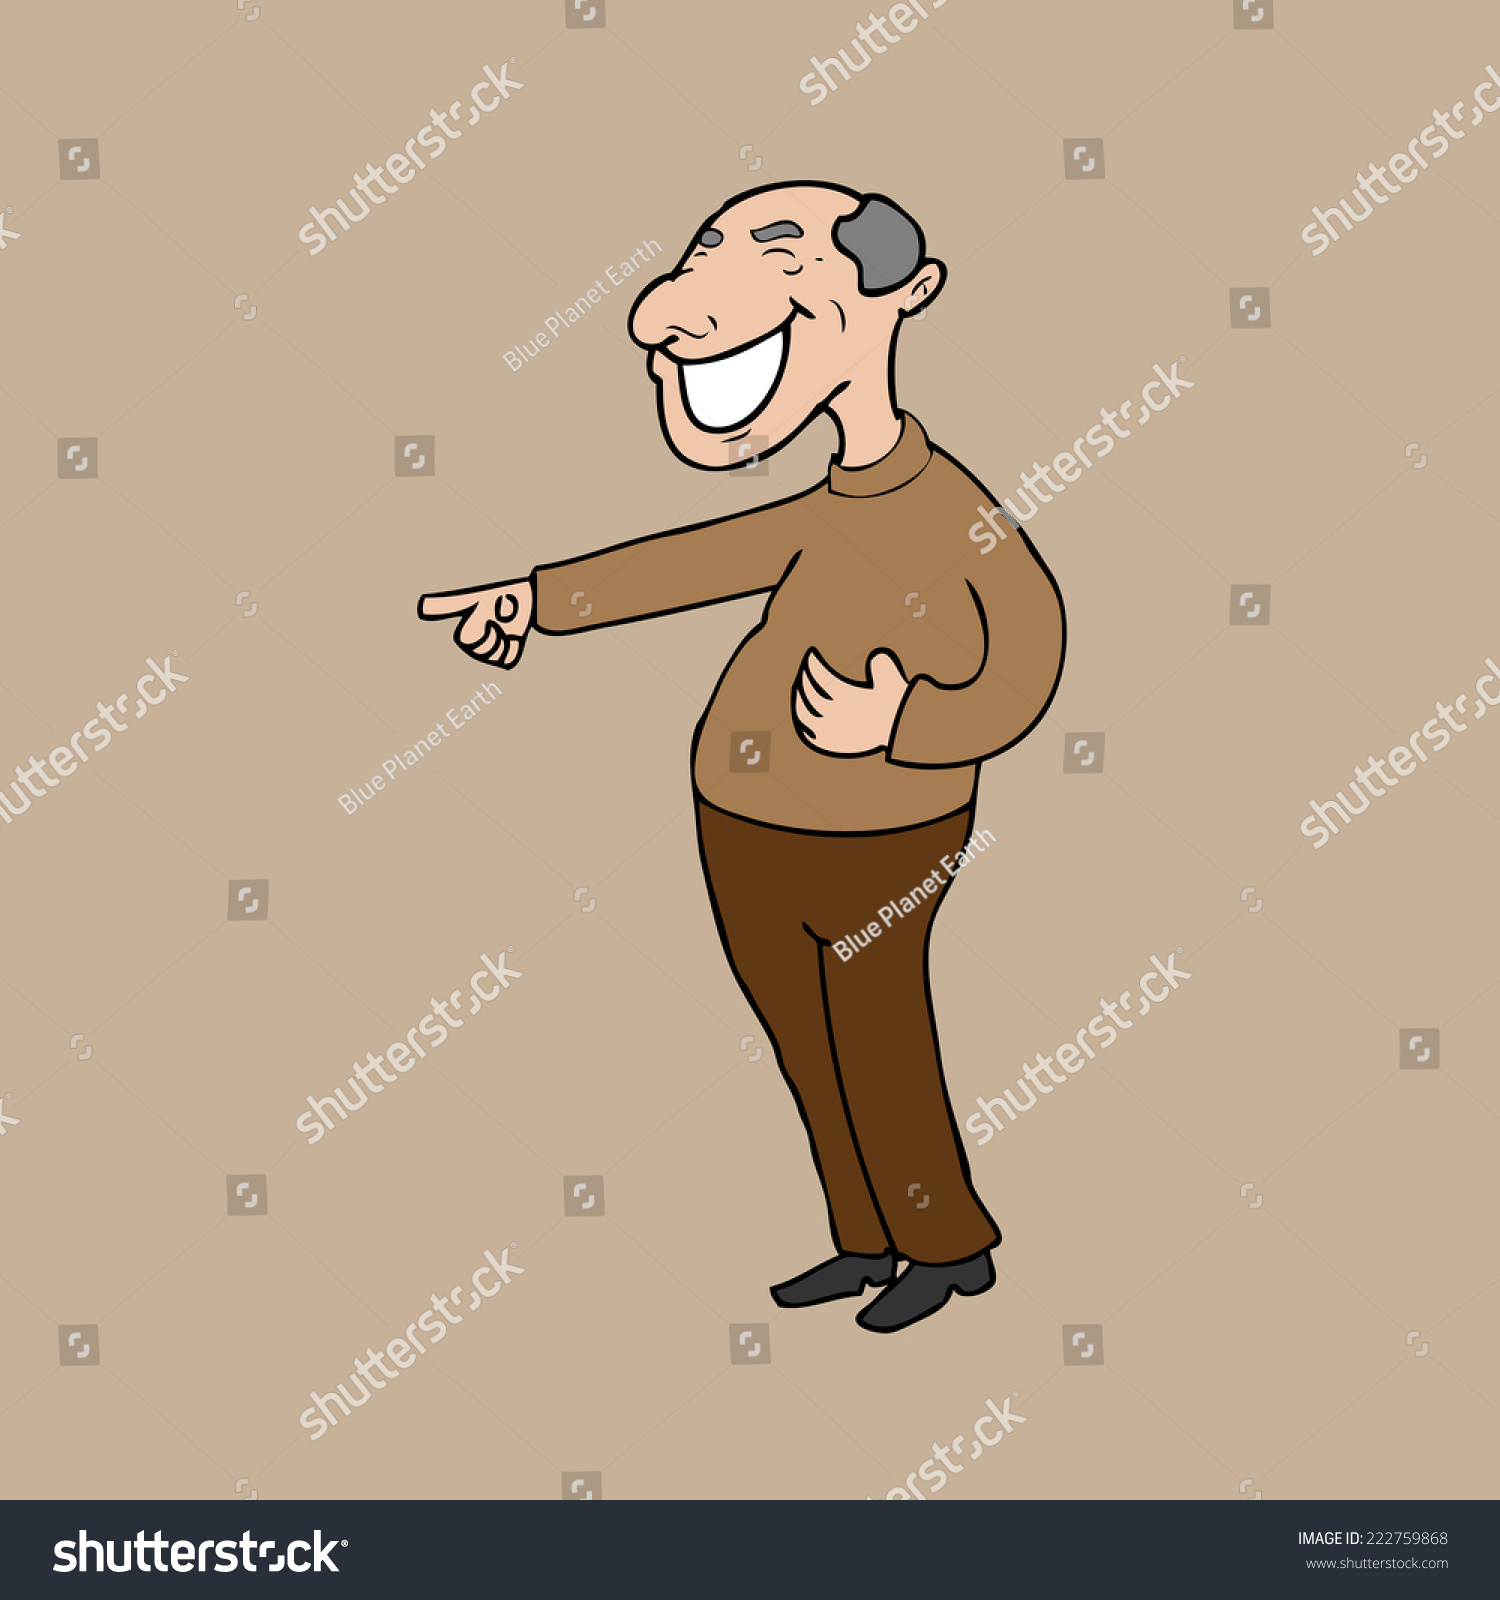 Old Man Laughing Pointing Cartoon Vector Stock Vector (Royalty Free ...